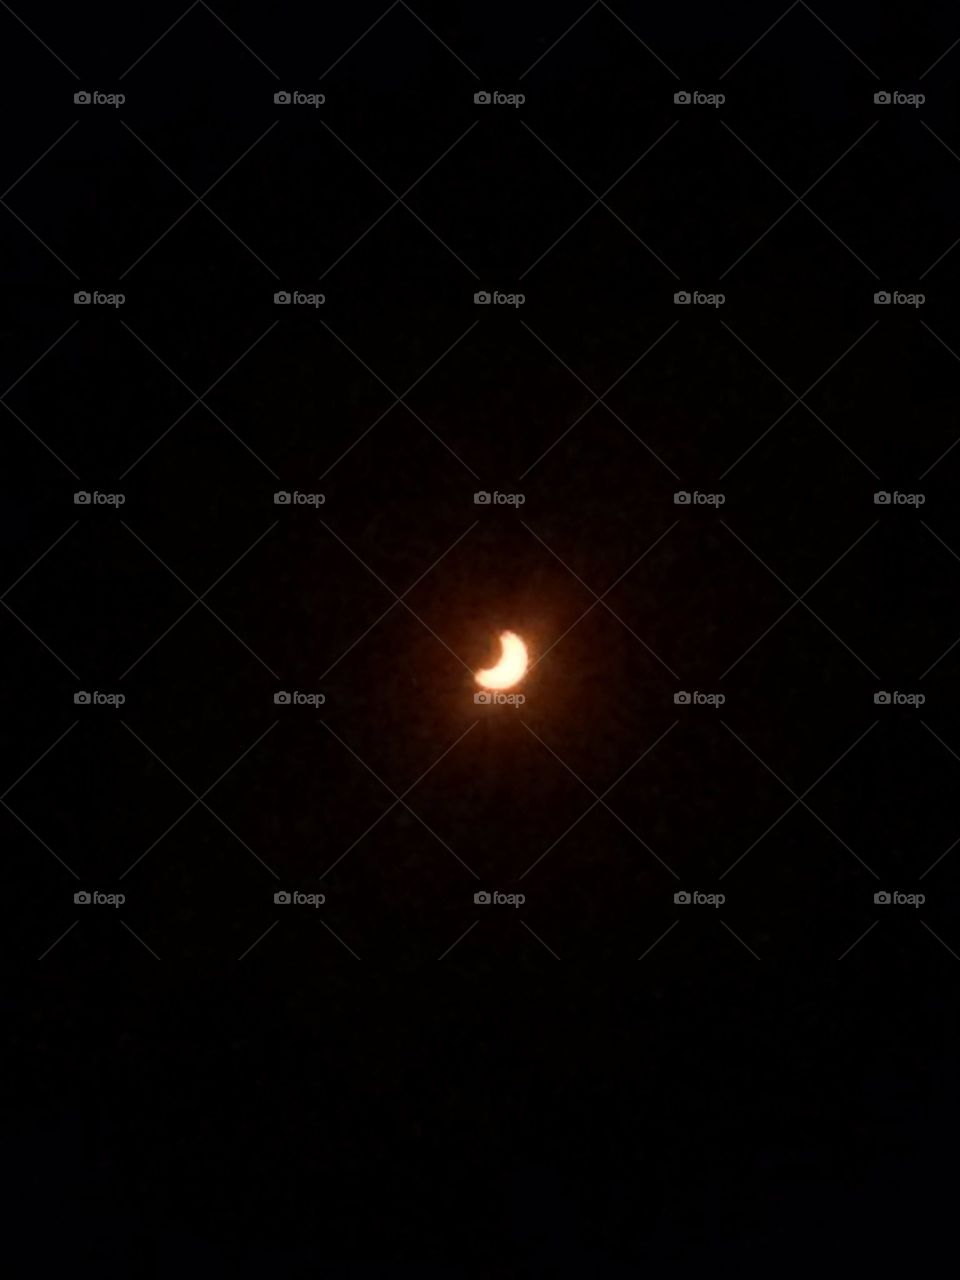 A picture of the solar eclipse during totality in Nashville, Tennessee on Aug 21st 2017.